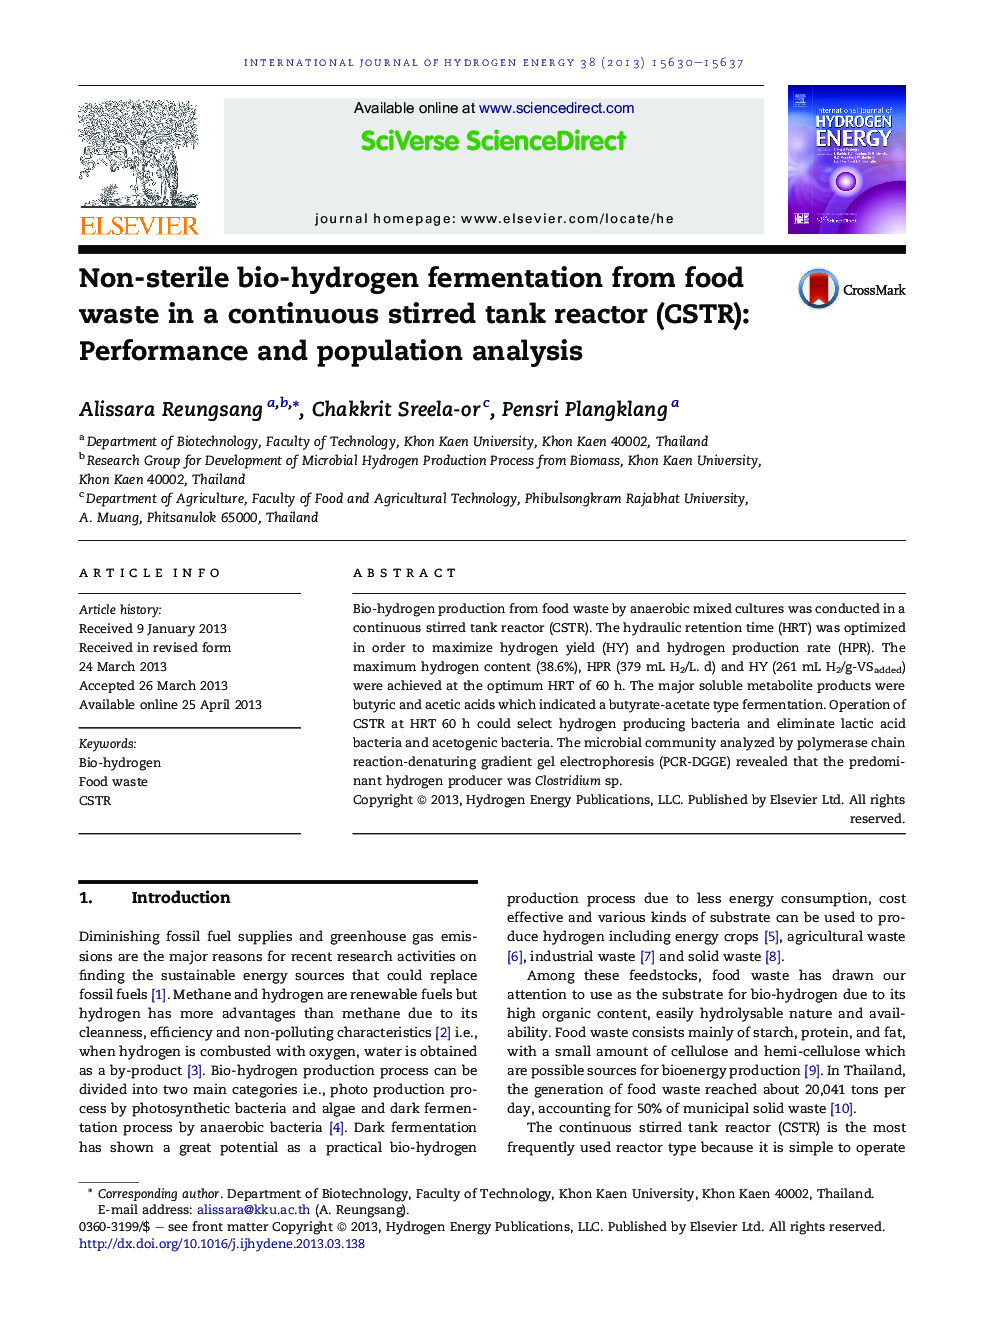 Non-sterile bio-hydrogen fermentation from food waste in a continuous stirred tank reactor (CSTR): Performance and population analysis